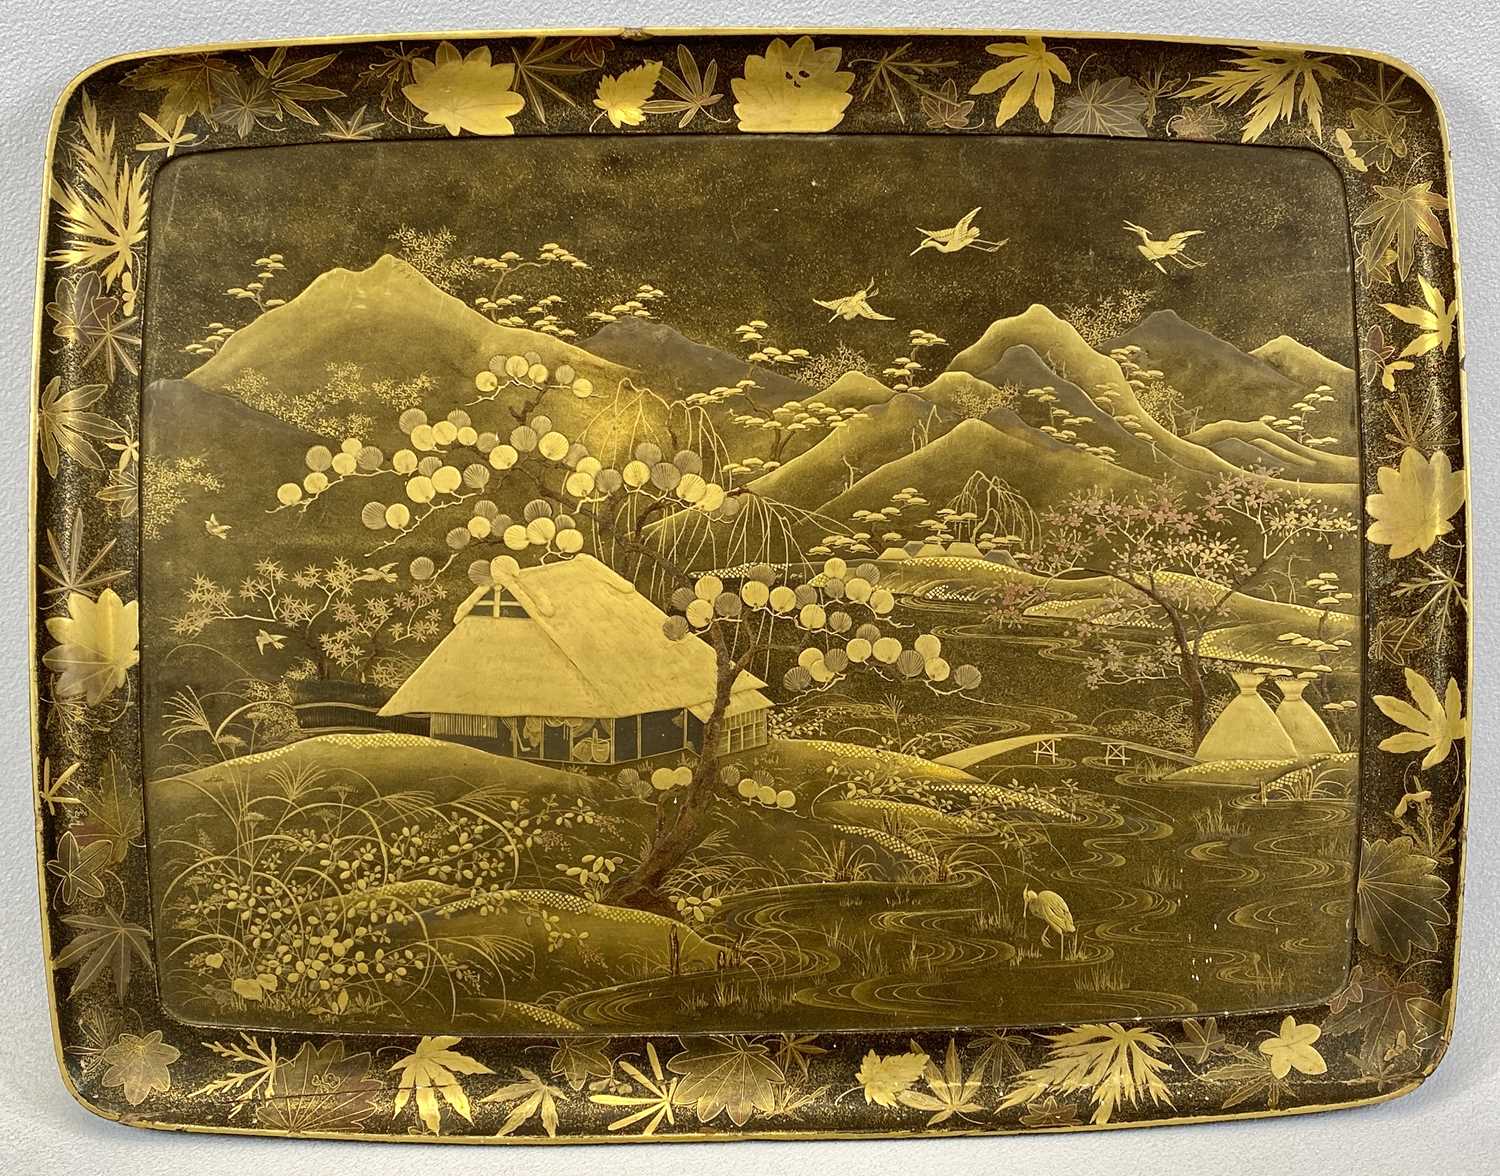 19TH CENTURY LACQUERED TEA TRAY GILDED CHINOISERIE DECORATION, extensive landscape with birds within